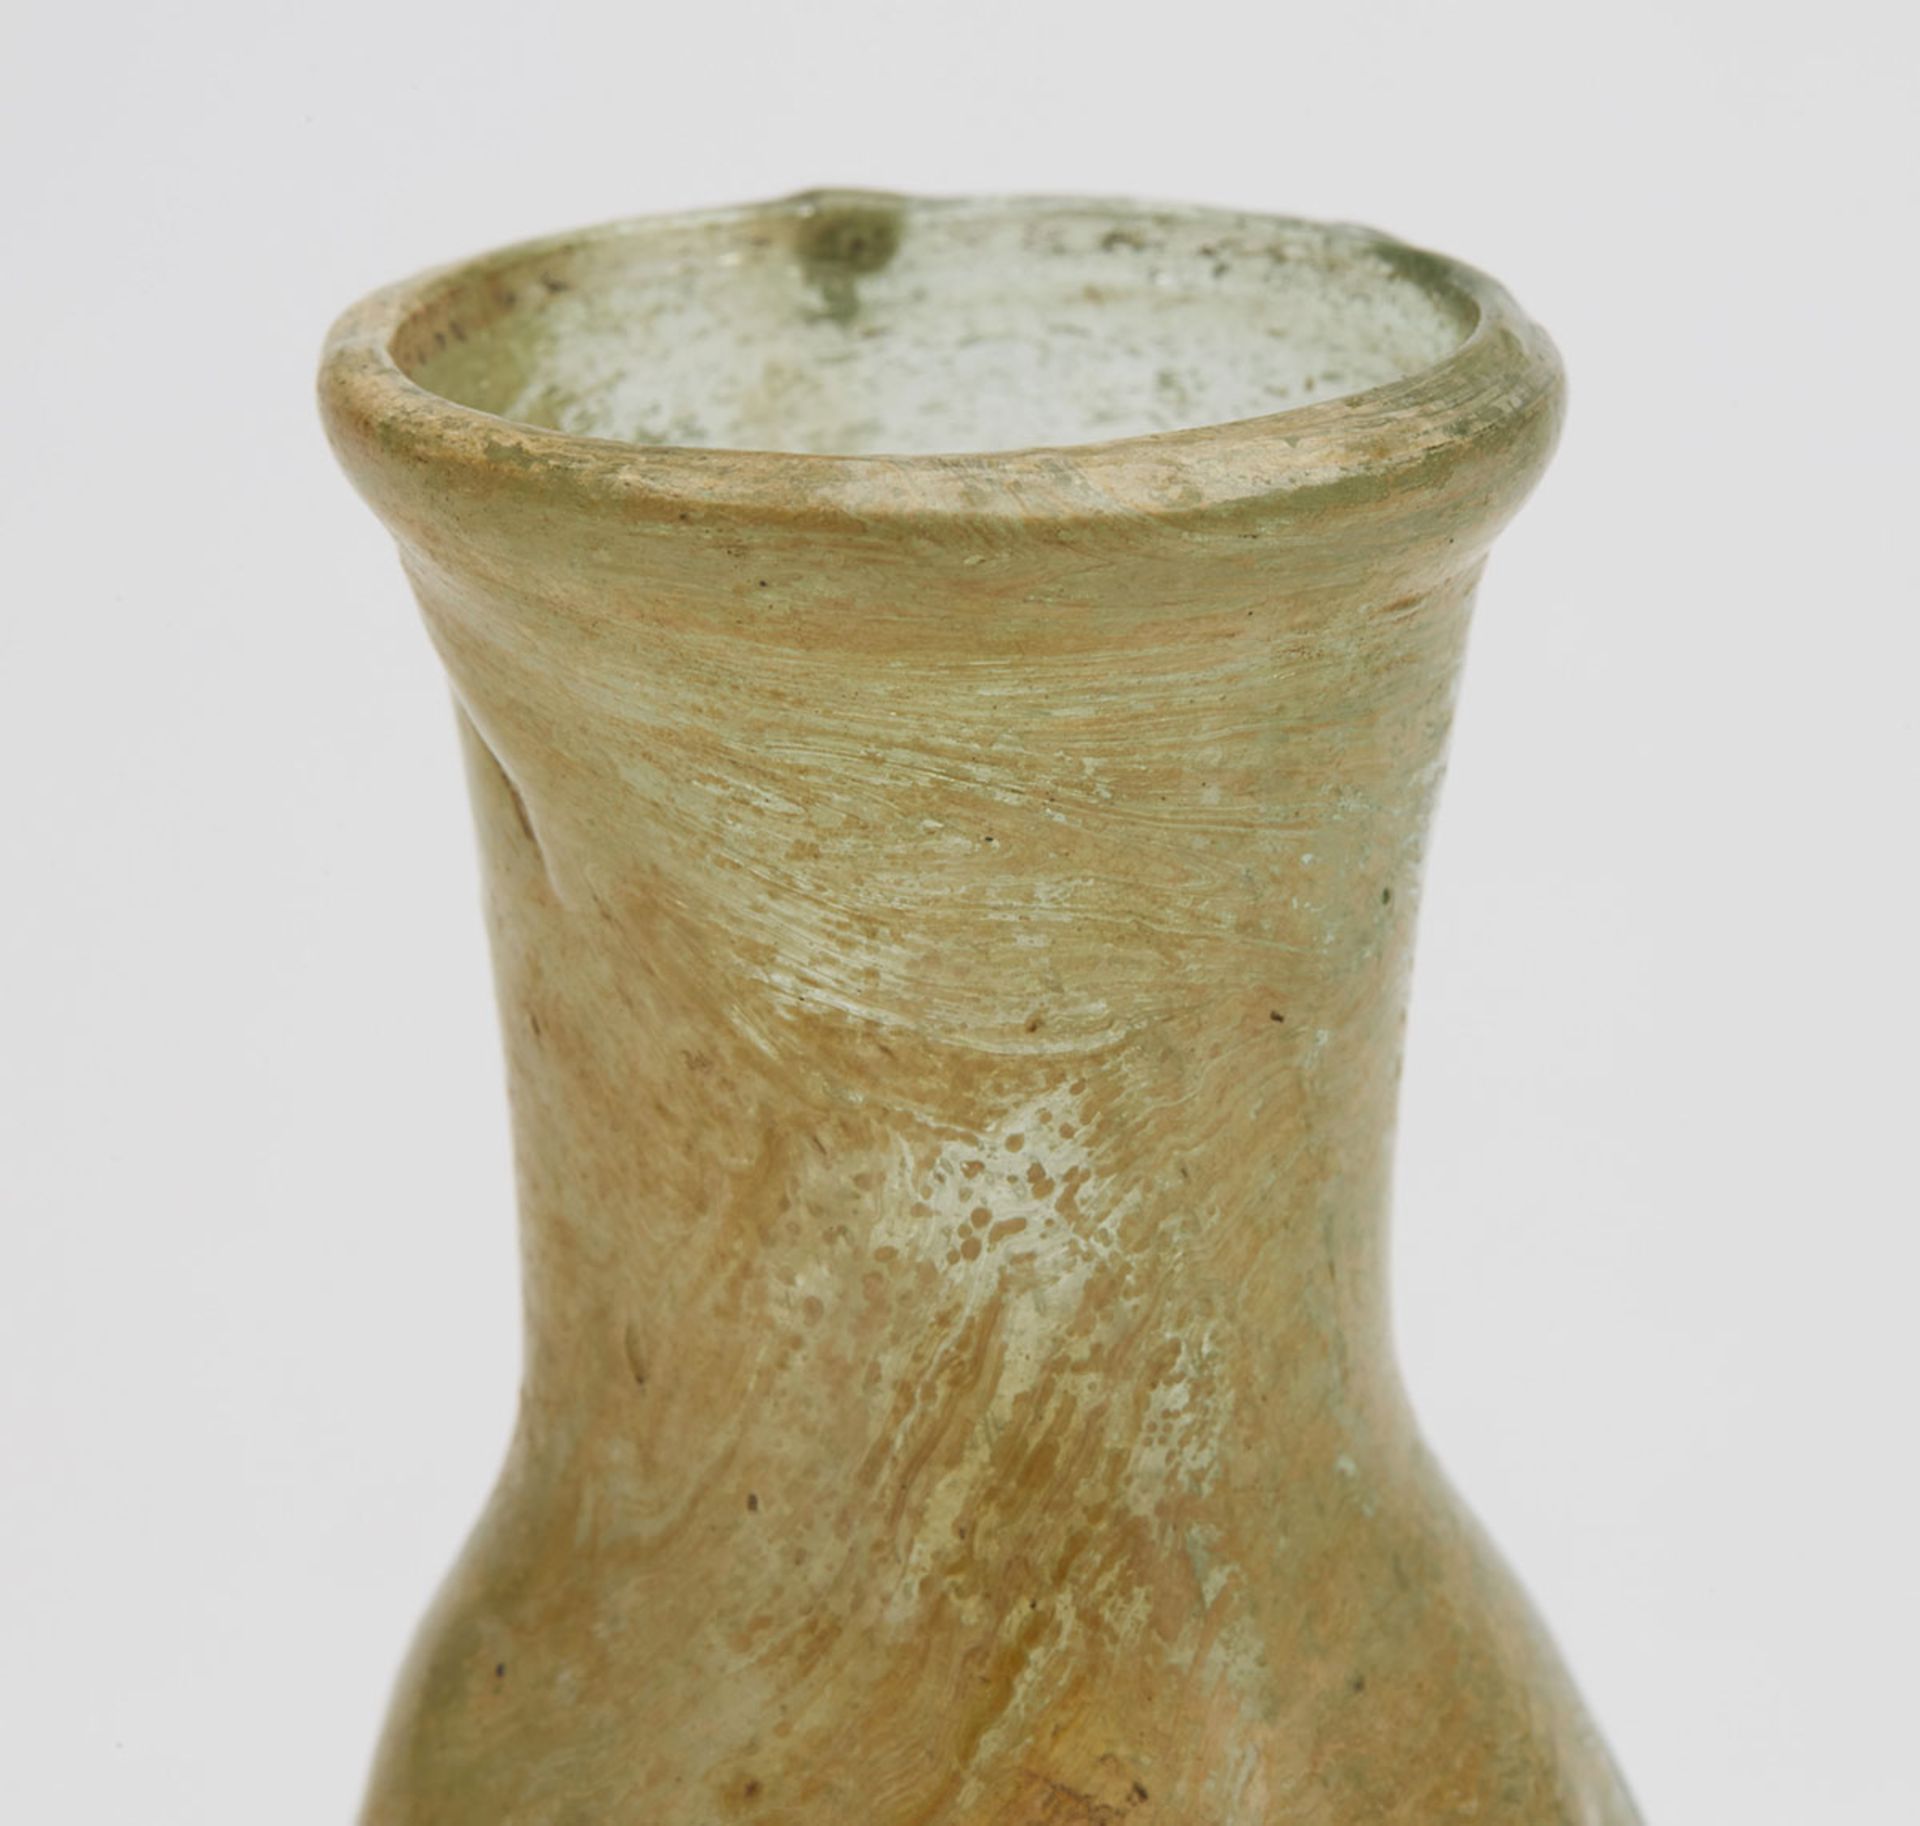 Ancient Roman Green Glass Ribbed Bottle 2Nd Century Ad - Image 2 of 6